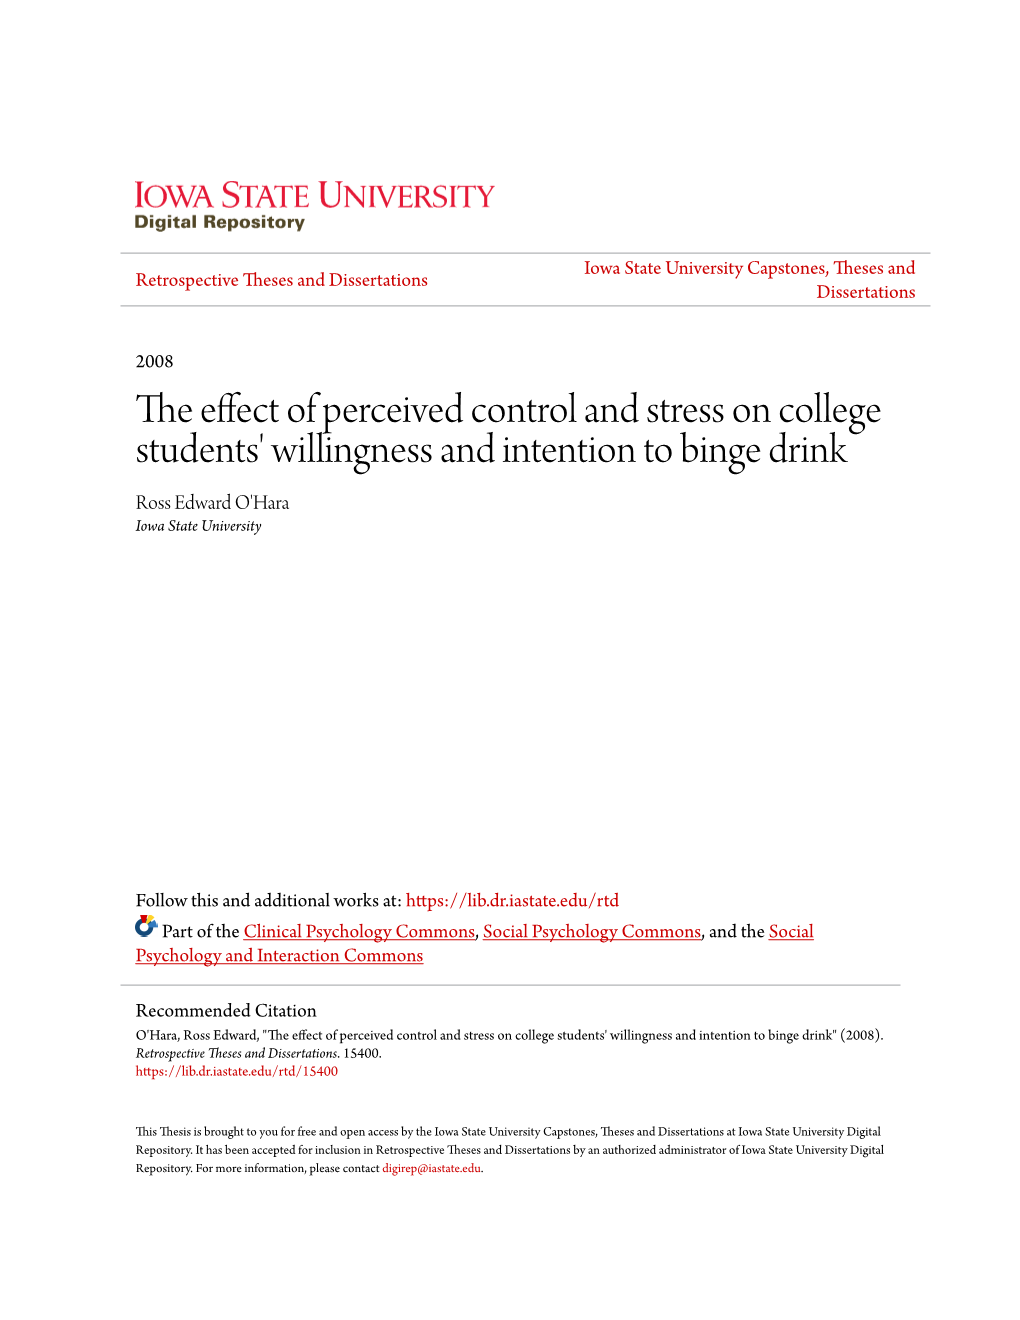 The Effect of Perceived Control and Stress on College Students' Willingness and Intention to Binge Drink Ross Edward O'hara Iowa State University